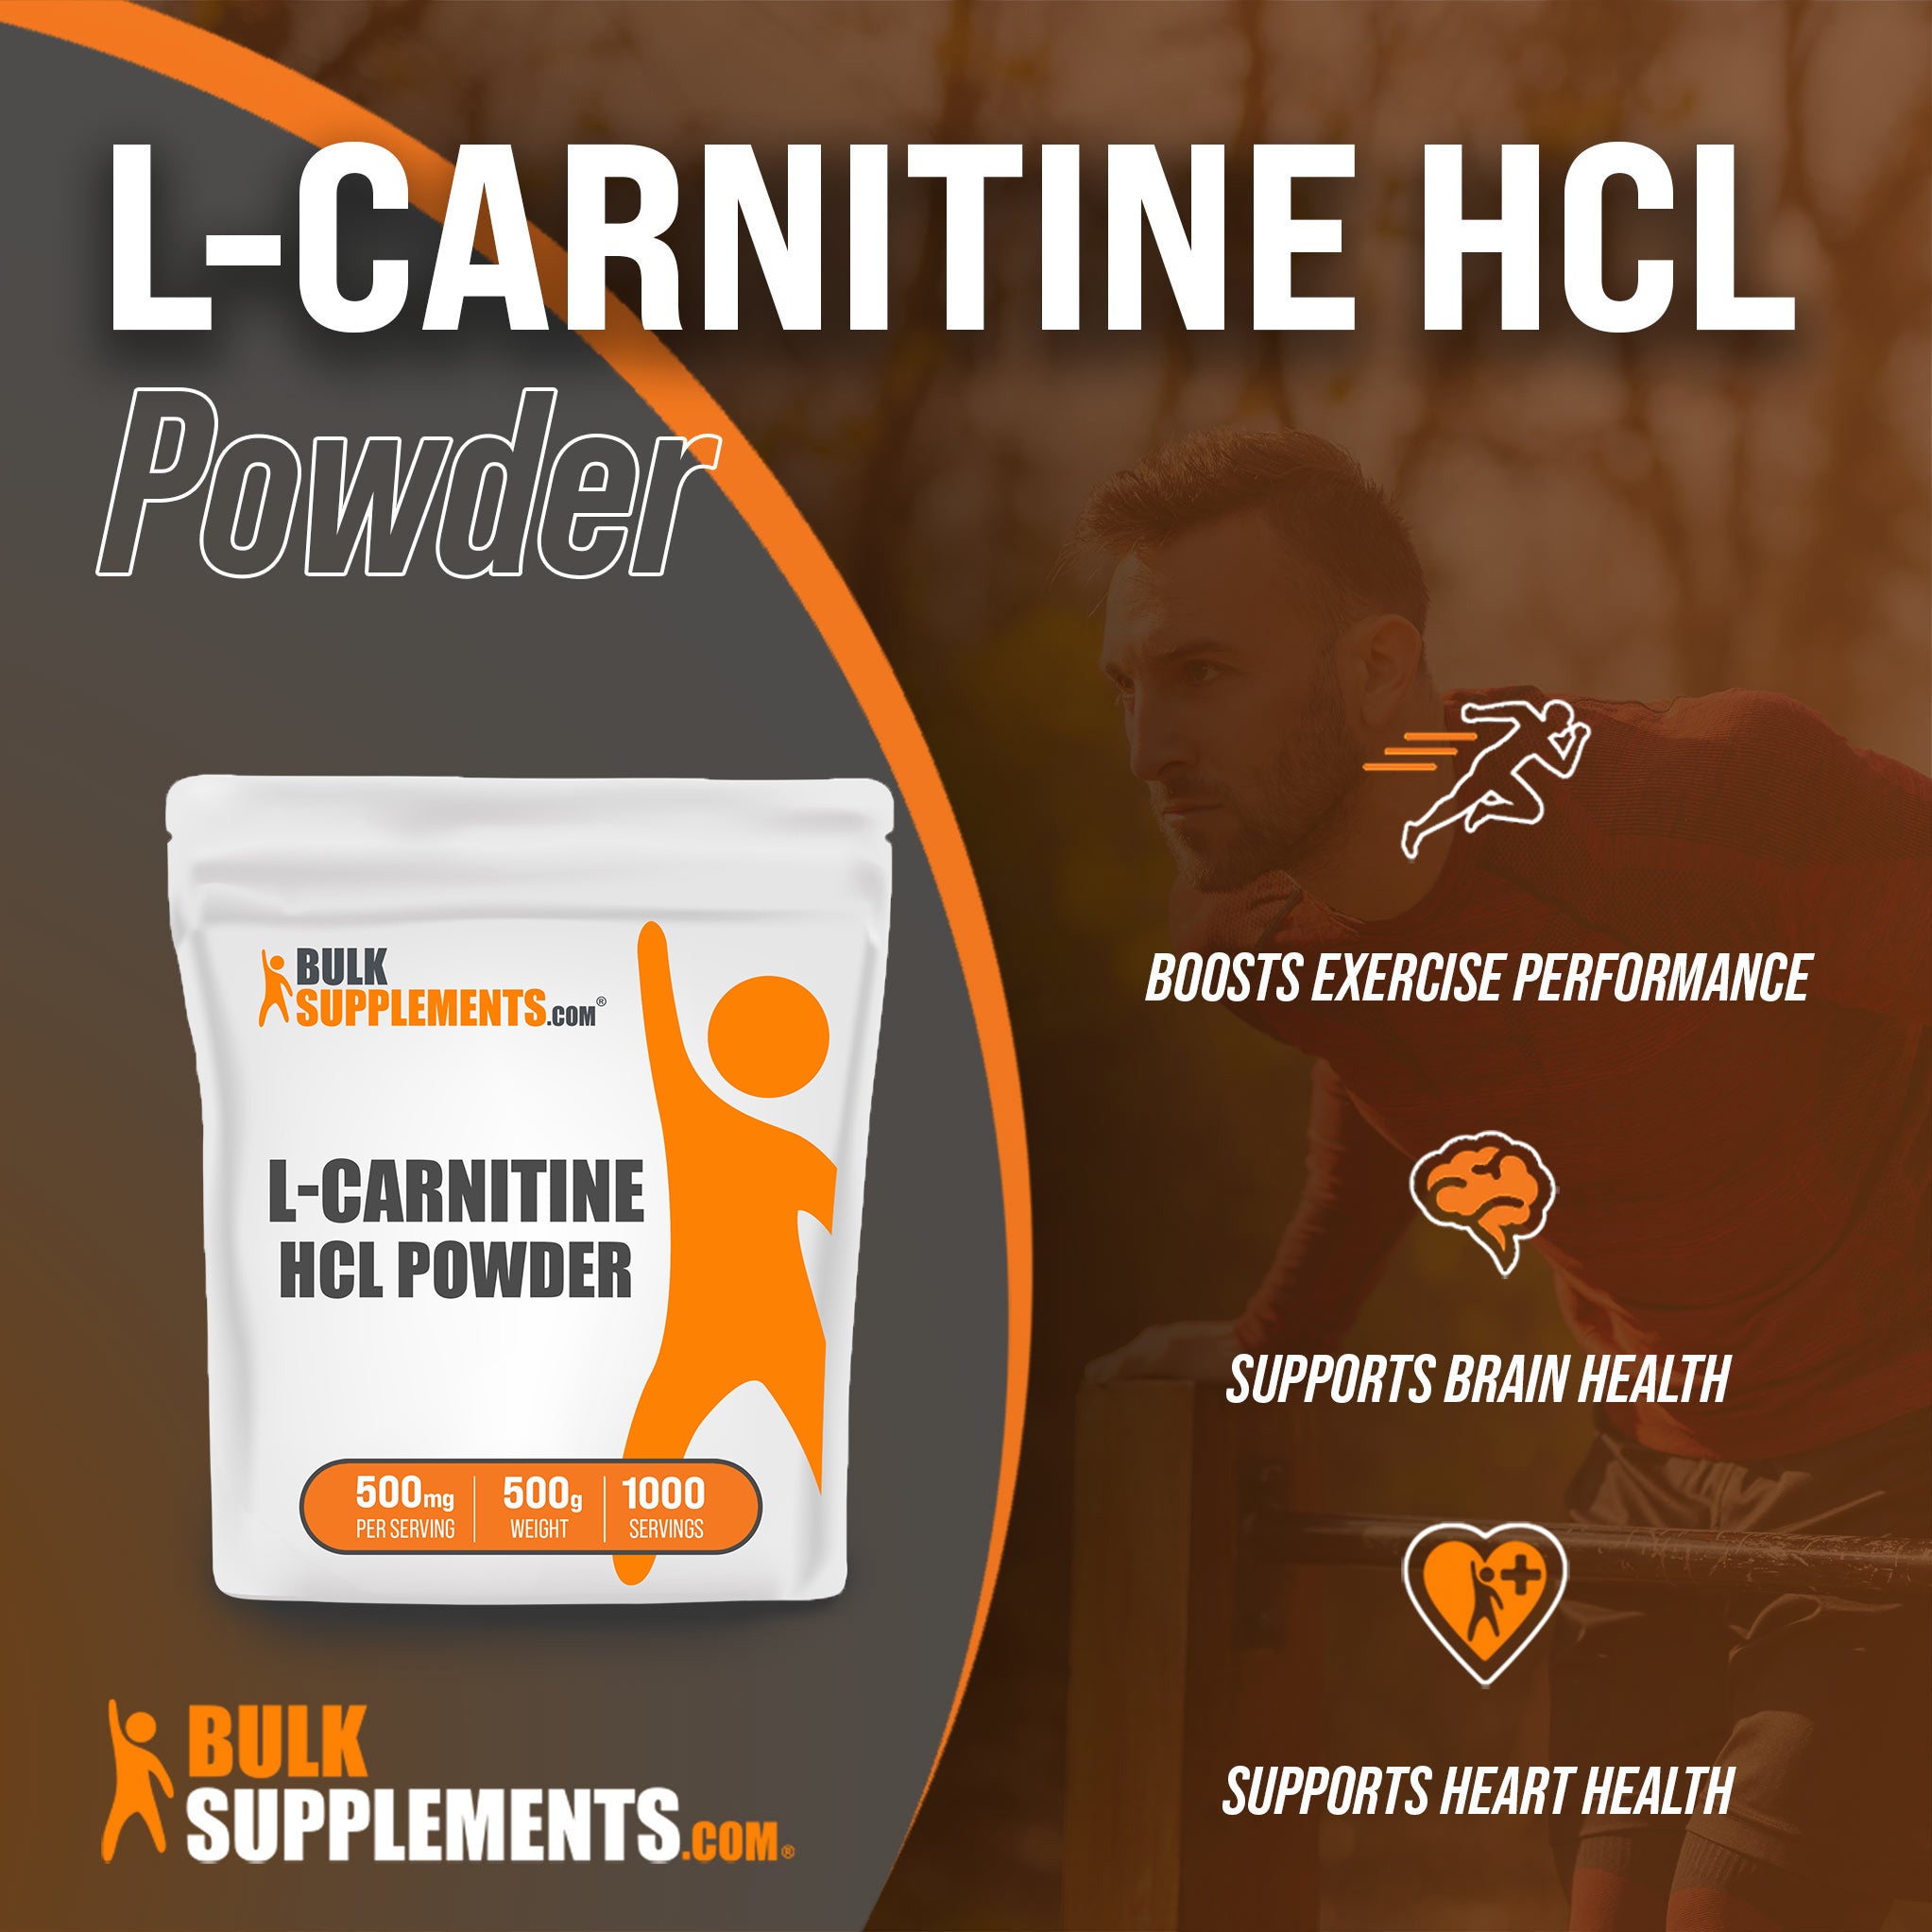 Benefits of L-Carnitine HCl: boosts exercise performance, supports brain health, supports heart health